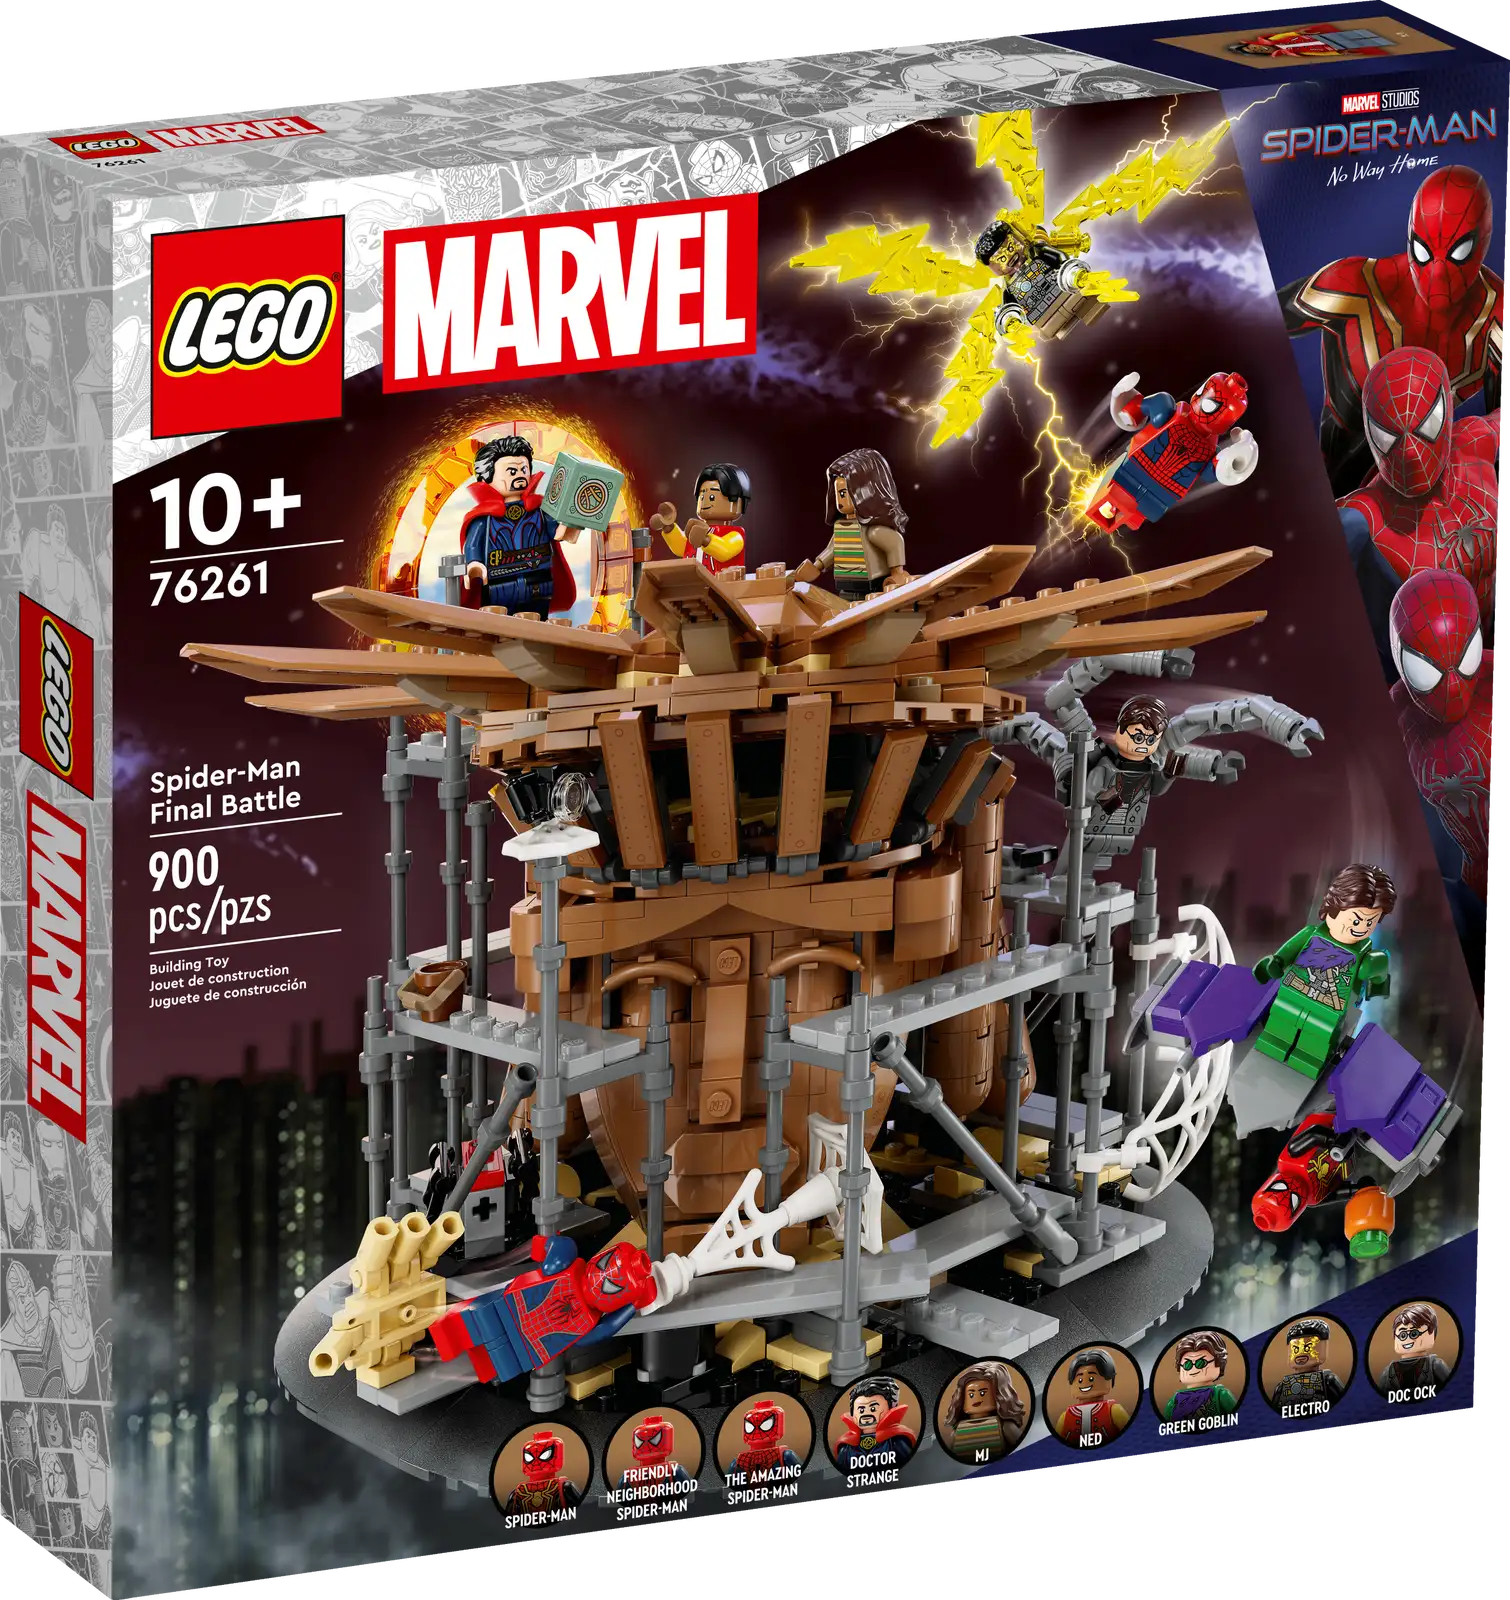 LEGO® Marvel Spider-Man Final Battle (76261) recreates the spectacular showdown from Marvel Studios’ Spider-Man: No Way Home movie. Packed with iconic characters and web-slinging action, this stunning celebration of Spider-Man will captivate fans aged 10 and up. 3 universes in 1 buildable toy This 360-degree set includes an amazing assortment of LEGO Marvel minifigures, including 3 versions of Spider-Man: Friendly Neighborhood Spider-Man (Tobey Maguire), The Amazing Spider-Man (Andrew Garfield) and Spider-Man (Tom Holland). The other minifigures are Electro, Doctor Strange, Green Goblin, Ned, MJ and Doc Ock. Numerous features are included to maximize play-and-display possibilities, including 3 minifigure supports for midair action, a removable roof that reveals Sandman’s hand, a flip-open rear access to a portal and a soft web element to envelop minifigures. For added digital fun, builders can zoom in, rotate sets in 3D and track their progress using the fun, intuitive LEGO Builder app. A celebration of Spider-Man – LEGO® Marvel Spider-Man Final Battle (76261) combines classic characters and web-slinging action from Marvel Studios’ Spider-Man: No Way Home Iconic characters – Friendly Neighborhood Spider-Man (Tobey Maguire), The Amazing Spider-Man (Andrew Garfield), Spider-Man (Tom Holland), Electro, Doctor Strange, Green Goblin, Ned, MJ and Doc Ock Packed with play-and-display fun – 3 minifigure supports enable midair action; a removable roof uncovers Sandman; a flip-open rear reveals a portal; a soft web wraps up the bad guys; and lots more Gift for young Super Heroes – Give this hands-on playset to Marvel movie fans aged 10 and up as a birthday, holiday or any-day treat 360-degree showpiece – The model measures over 7 in. (18 cm) high, 8 in. (20 cm) wide and 8.5 in. (22 cm) deep and provides an eye-catching display from any angle Intuitive building instructions – Kids can download the LEGO® Builder app for an immersive building experience, with digital tools to zoom in and rotate models in 3D, save sets and track progress Expand the Super Hero fun – The extensive range of LEGO® Marvel building toys provides endless imaginative possibilities for kids to build, play and display Quality guaranteed – LEGO® components meet stringent industry quality standards to ensure they are consistent, compatible and easy to build with Safety assured – LEGO® bricks and pieces are dropped, heated, crushed, twisted and analyzed to make sure they satisfy rigorous global safety standards